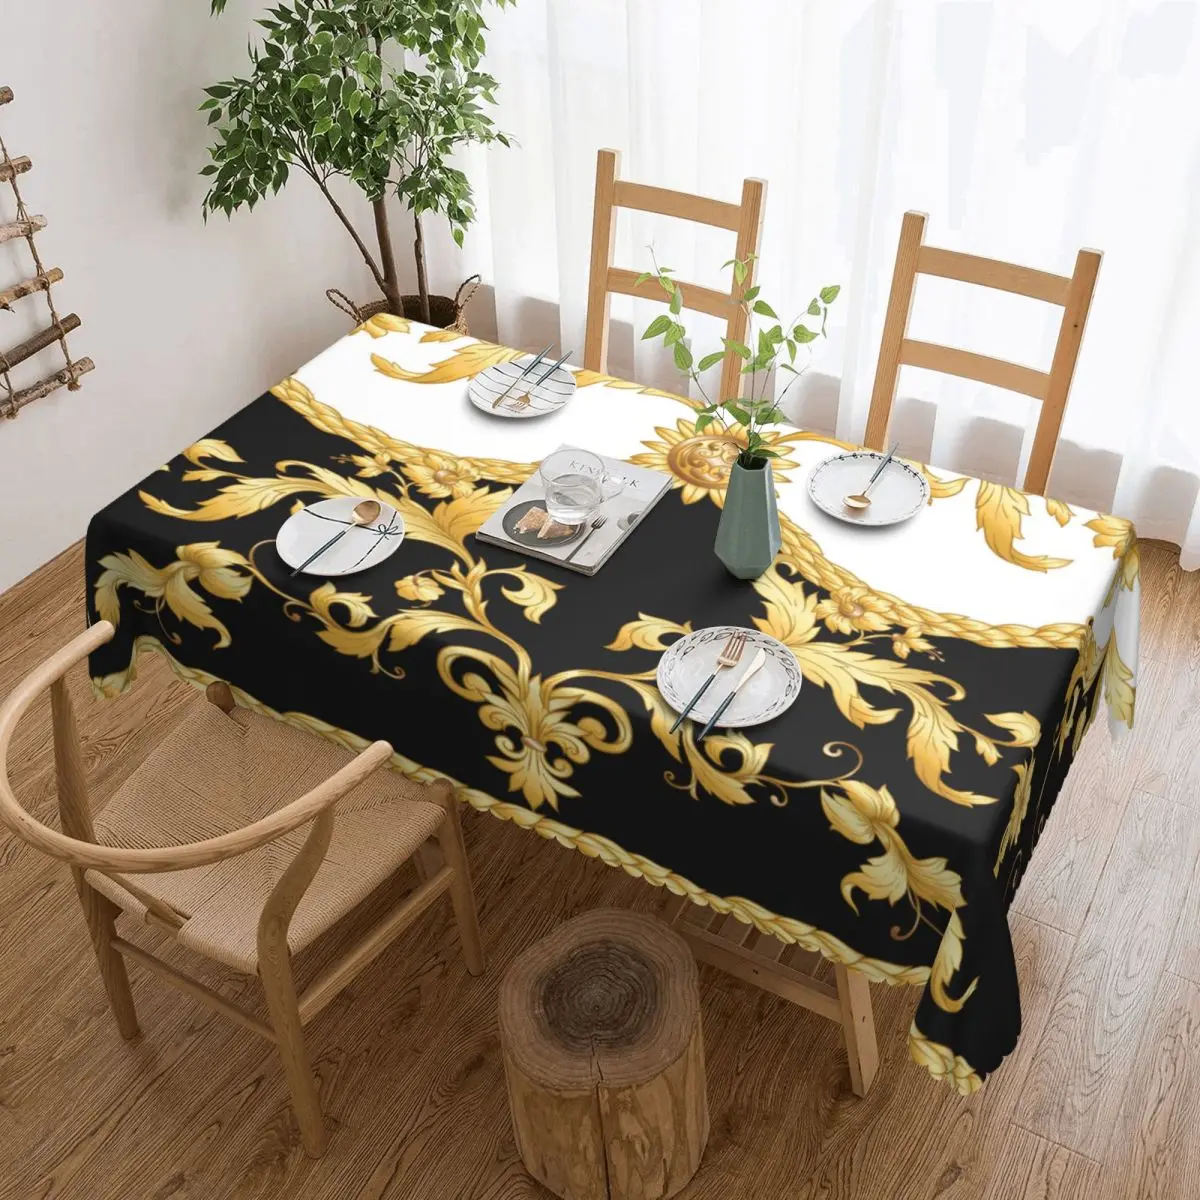 

Luxury European Floral Print Tablecloth Rectangular Waterproof Rococo Baroque Style Table Cover Cloth for Kitchen